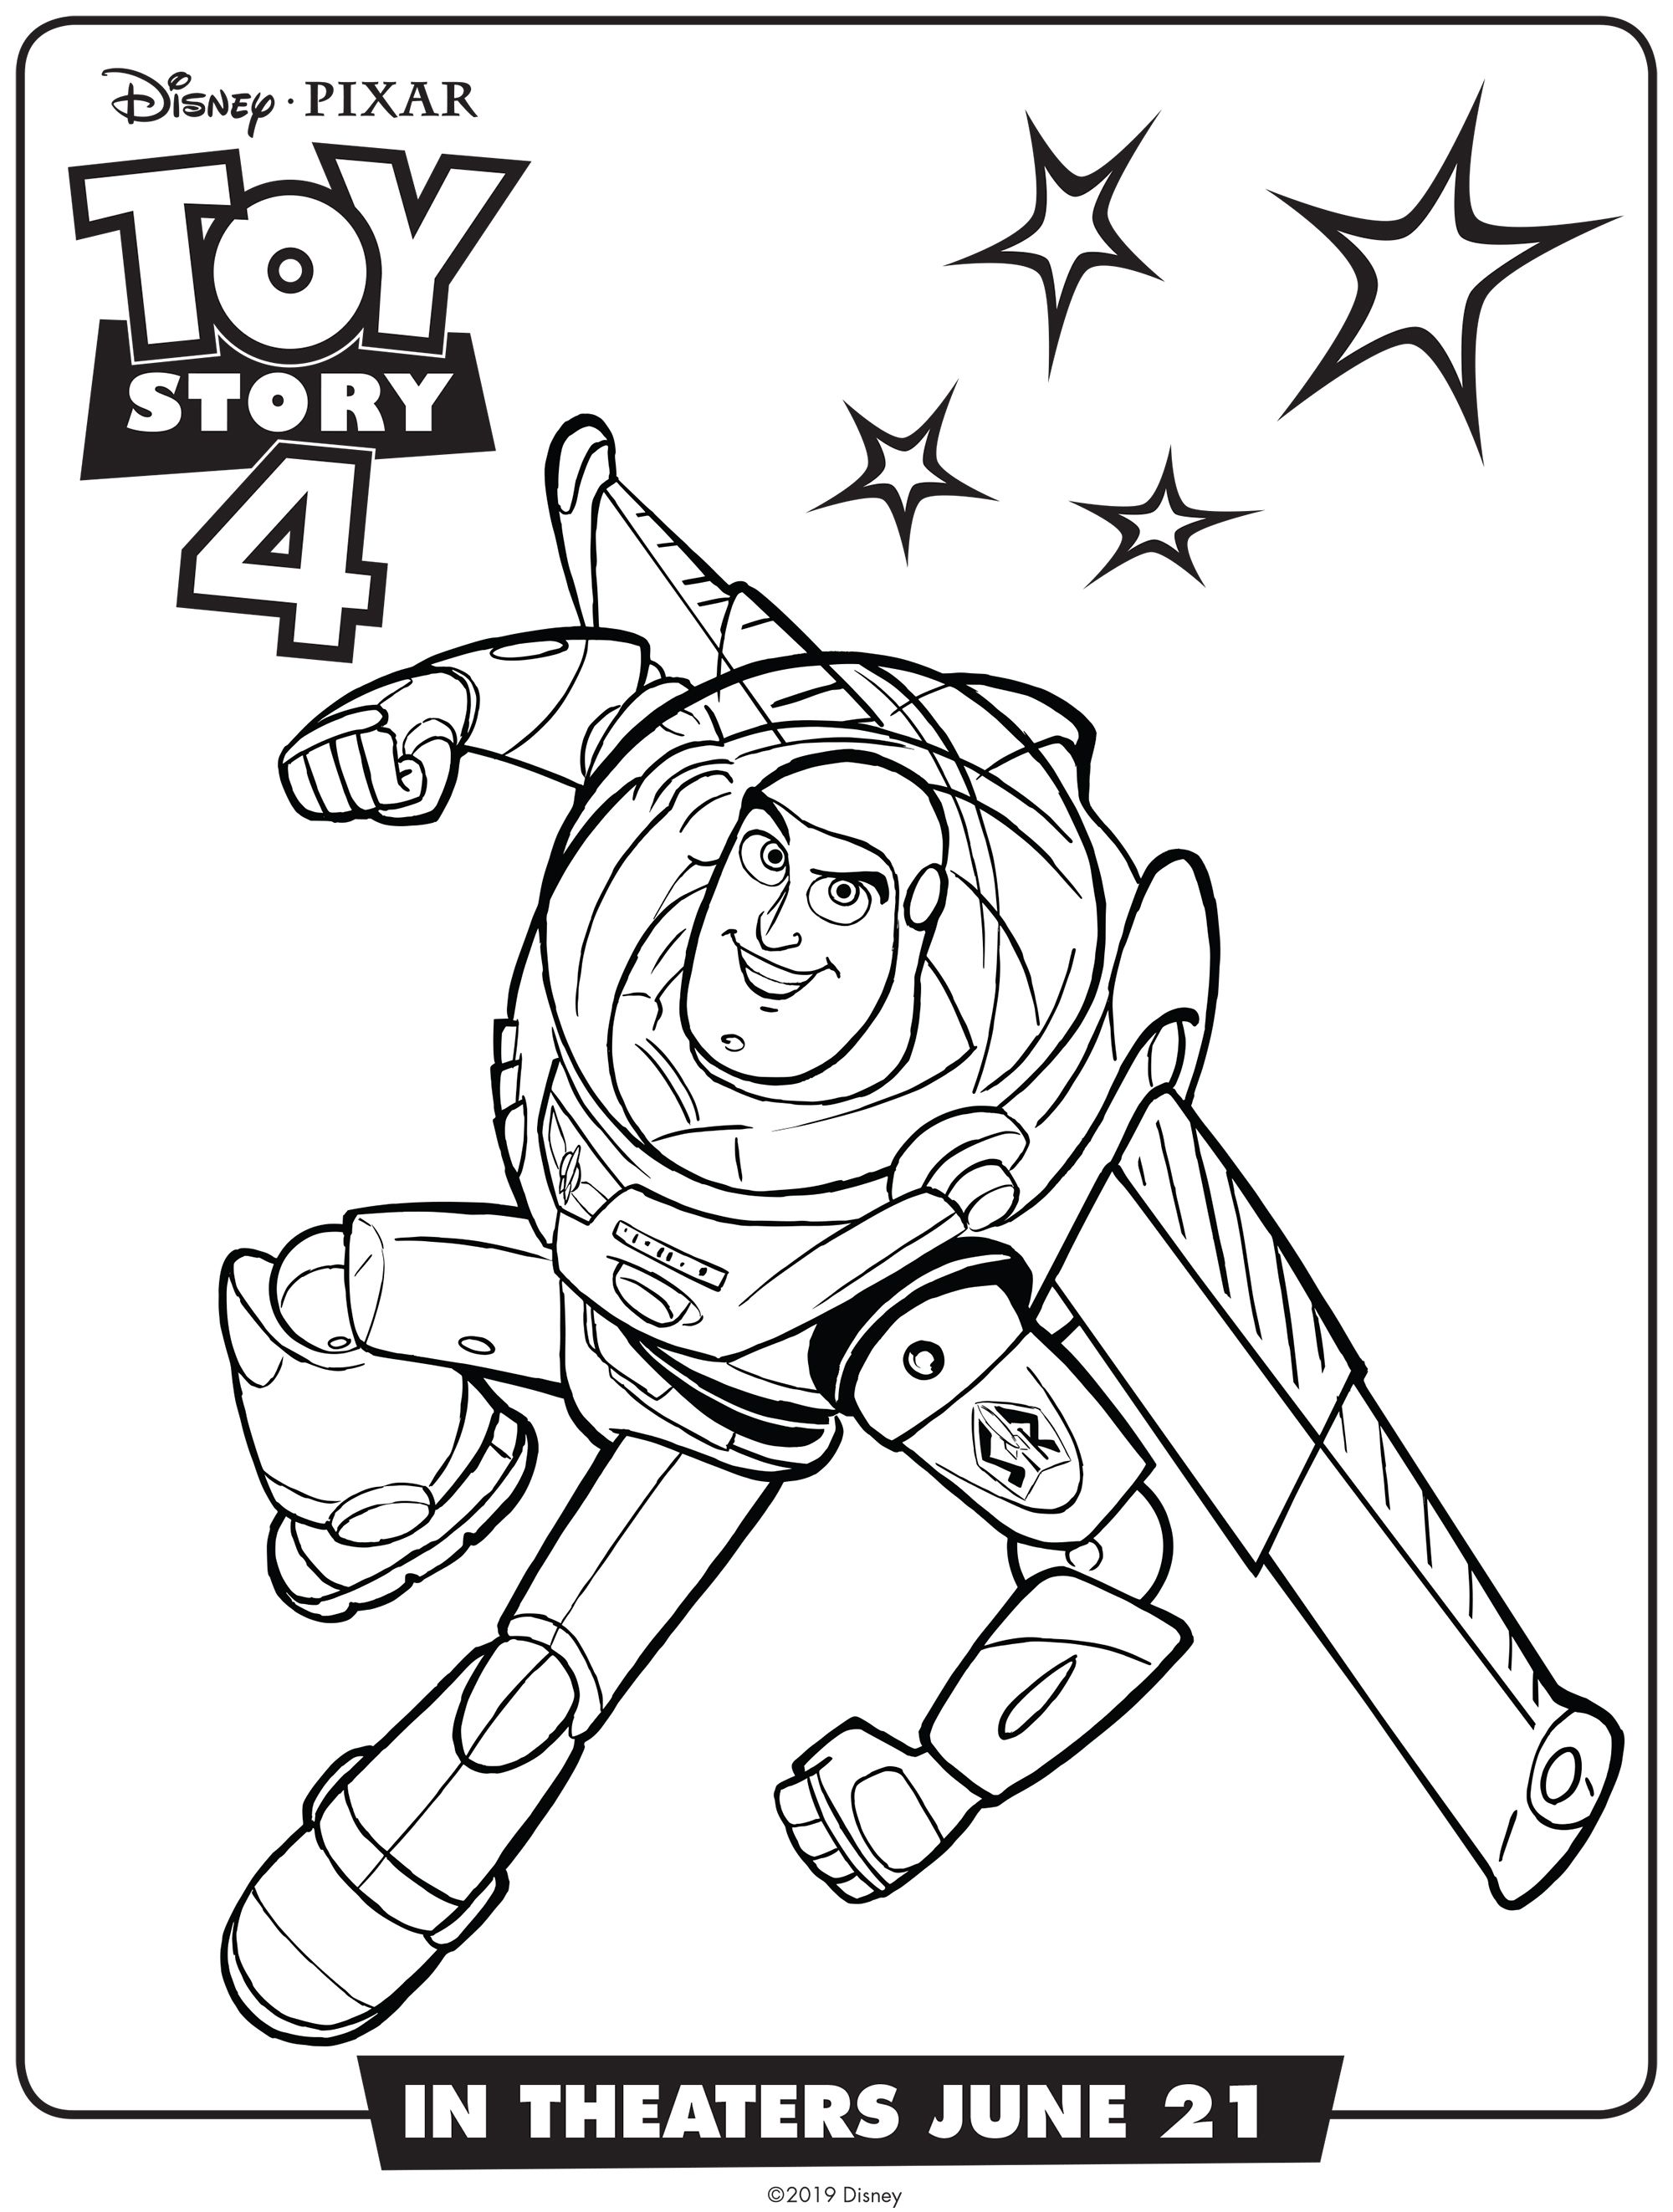 buzz lightyear toy story 4 coloring page disney pixar toy story 4 kids coloring pages